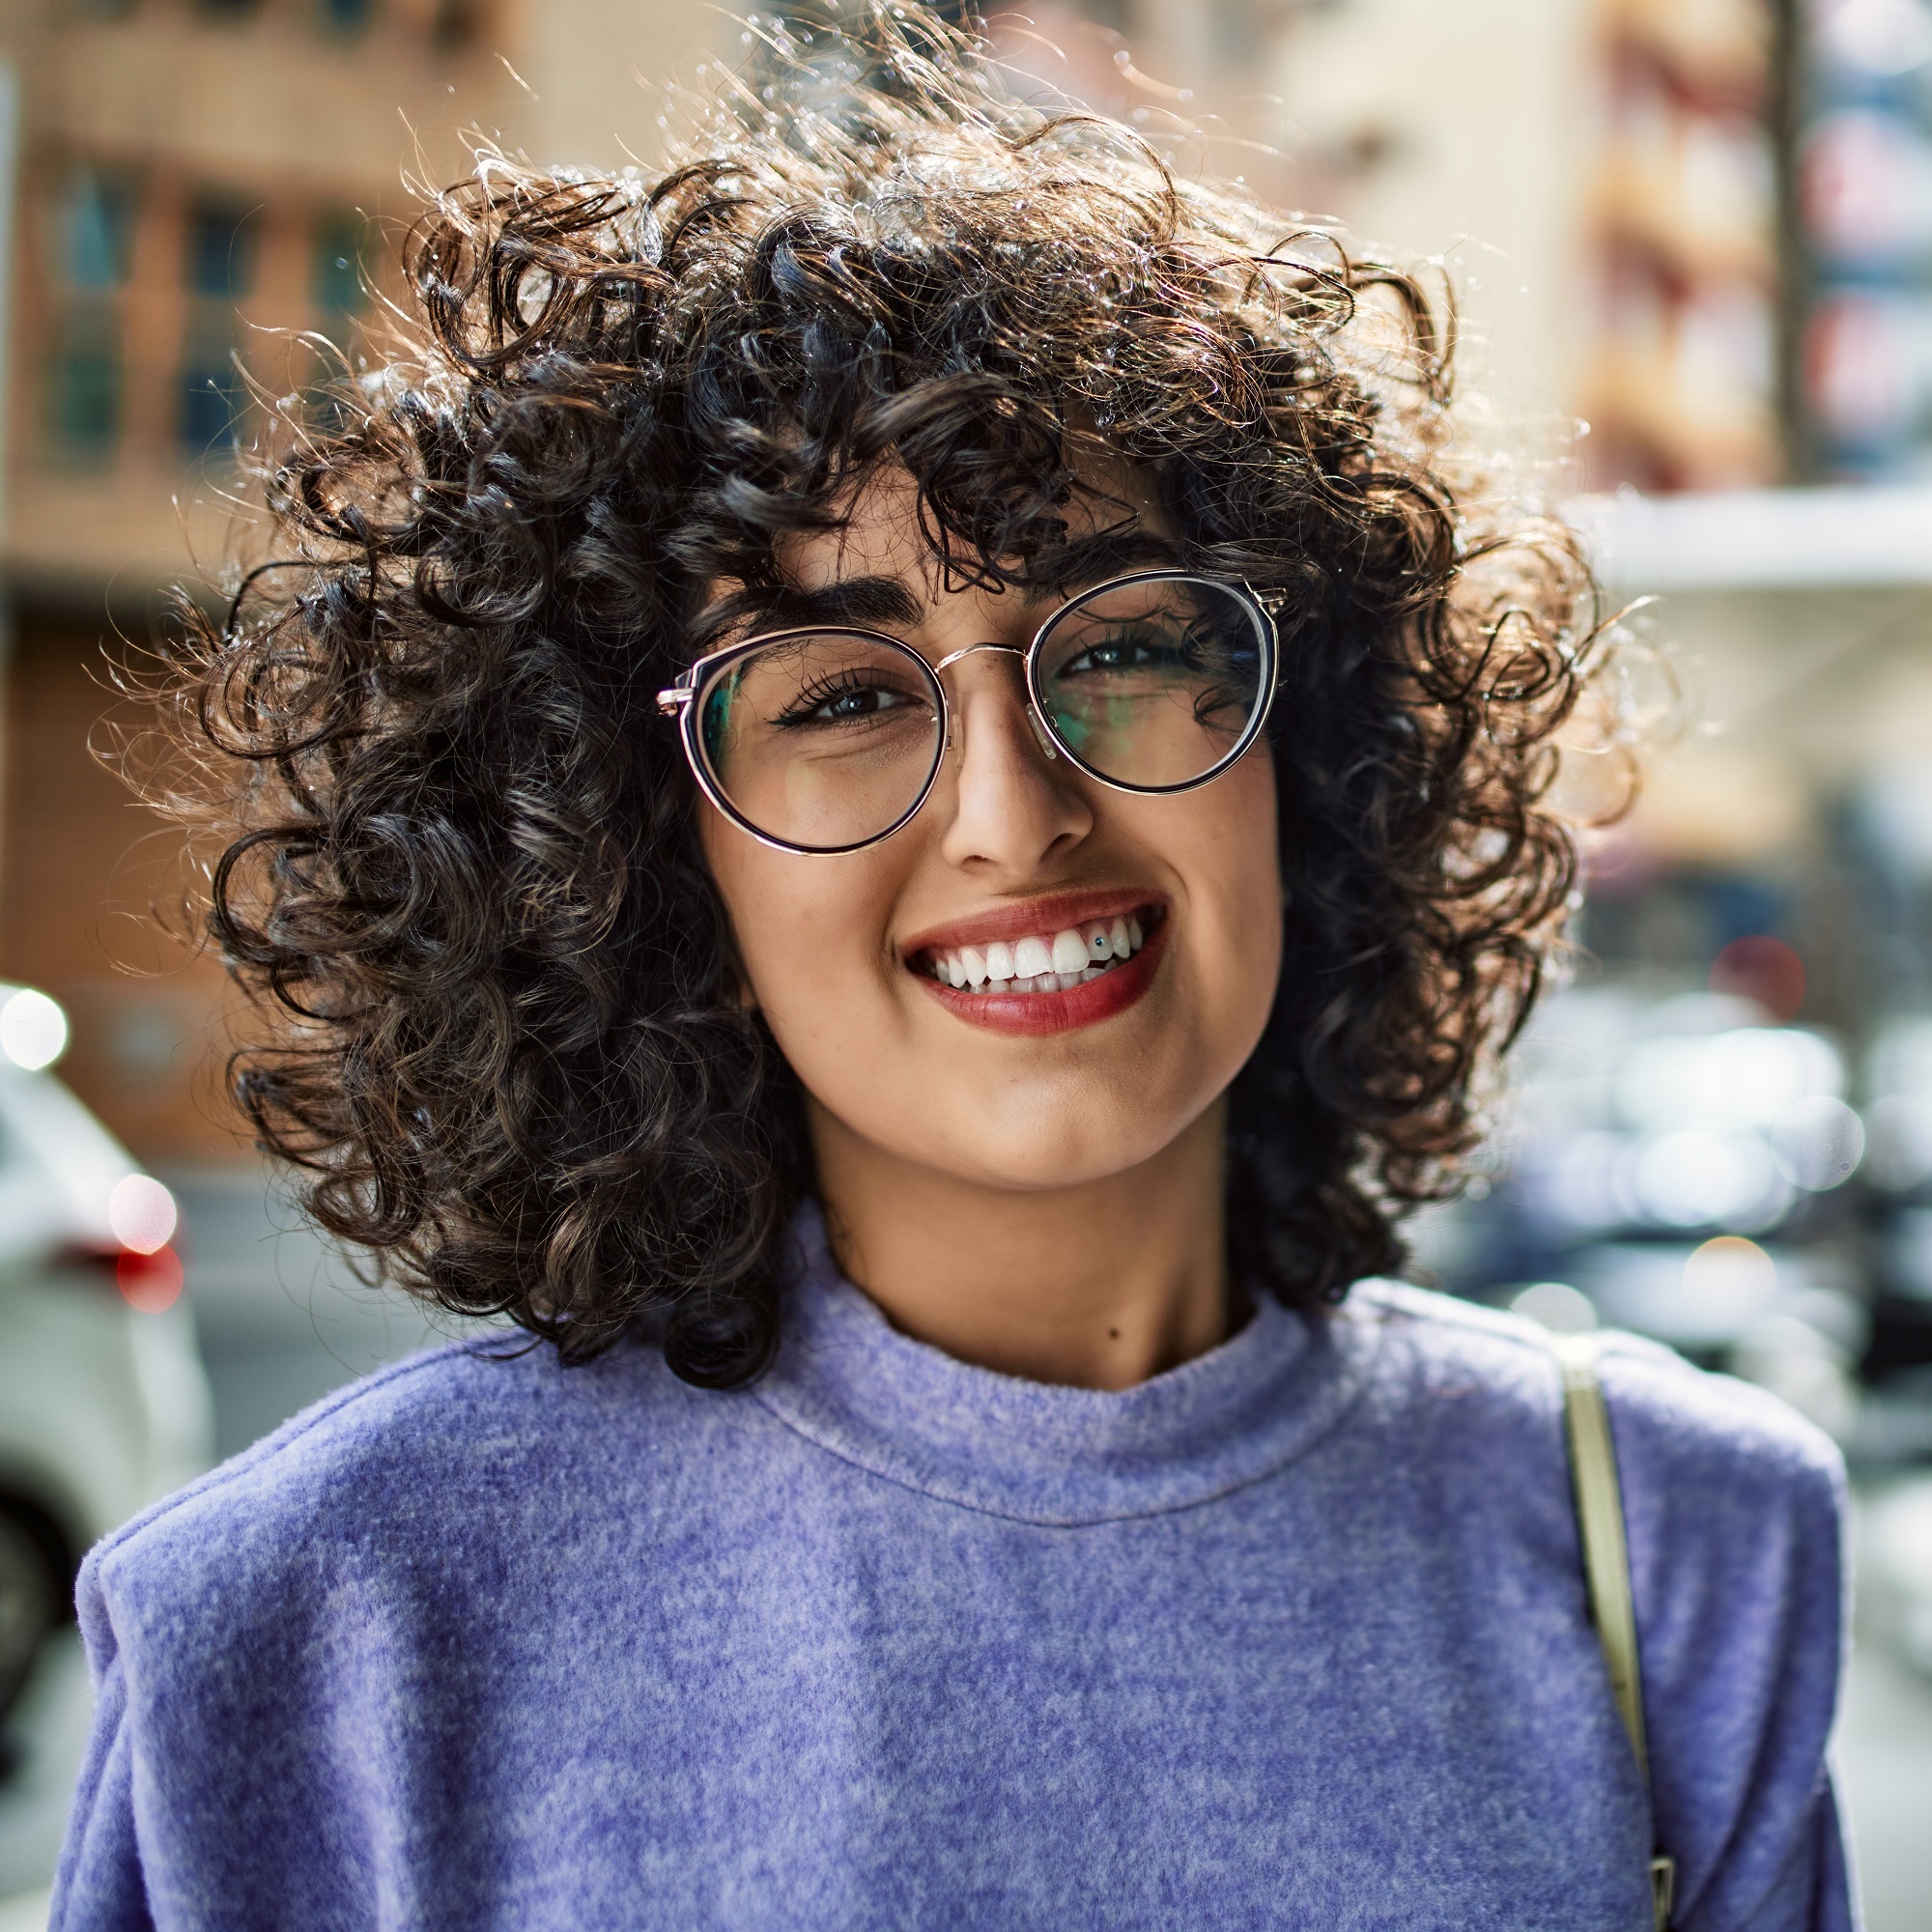 woman smiling confident wearing glasses at street